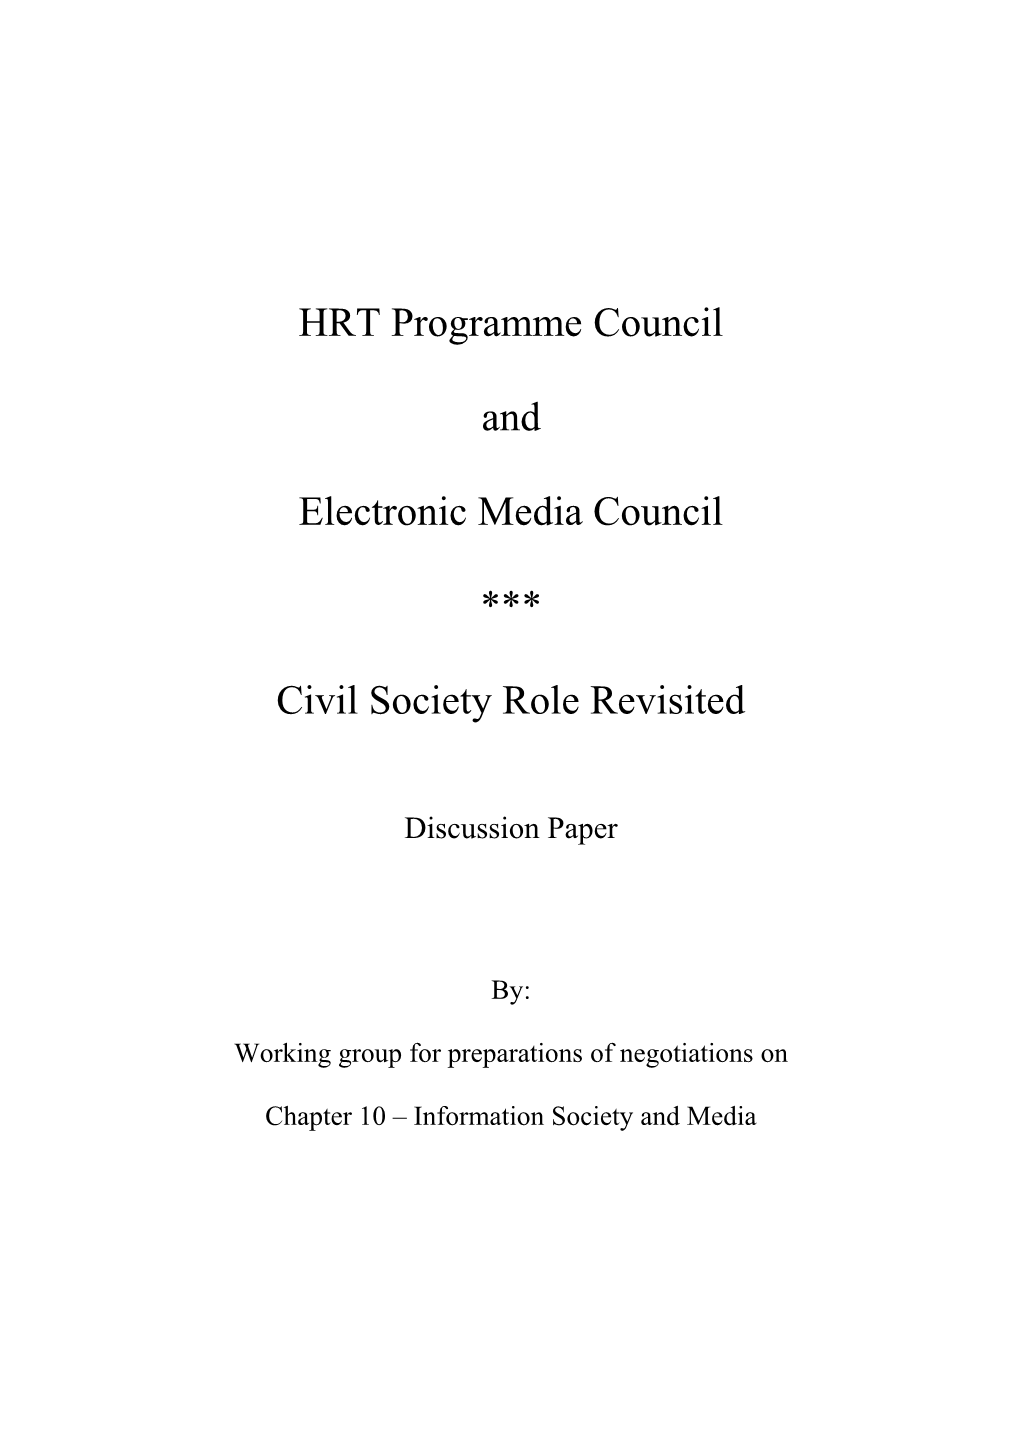 Appointment Procedure for the Members of the HRT Programme Council and the Electronic Media